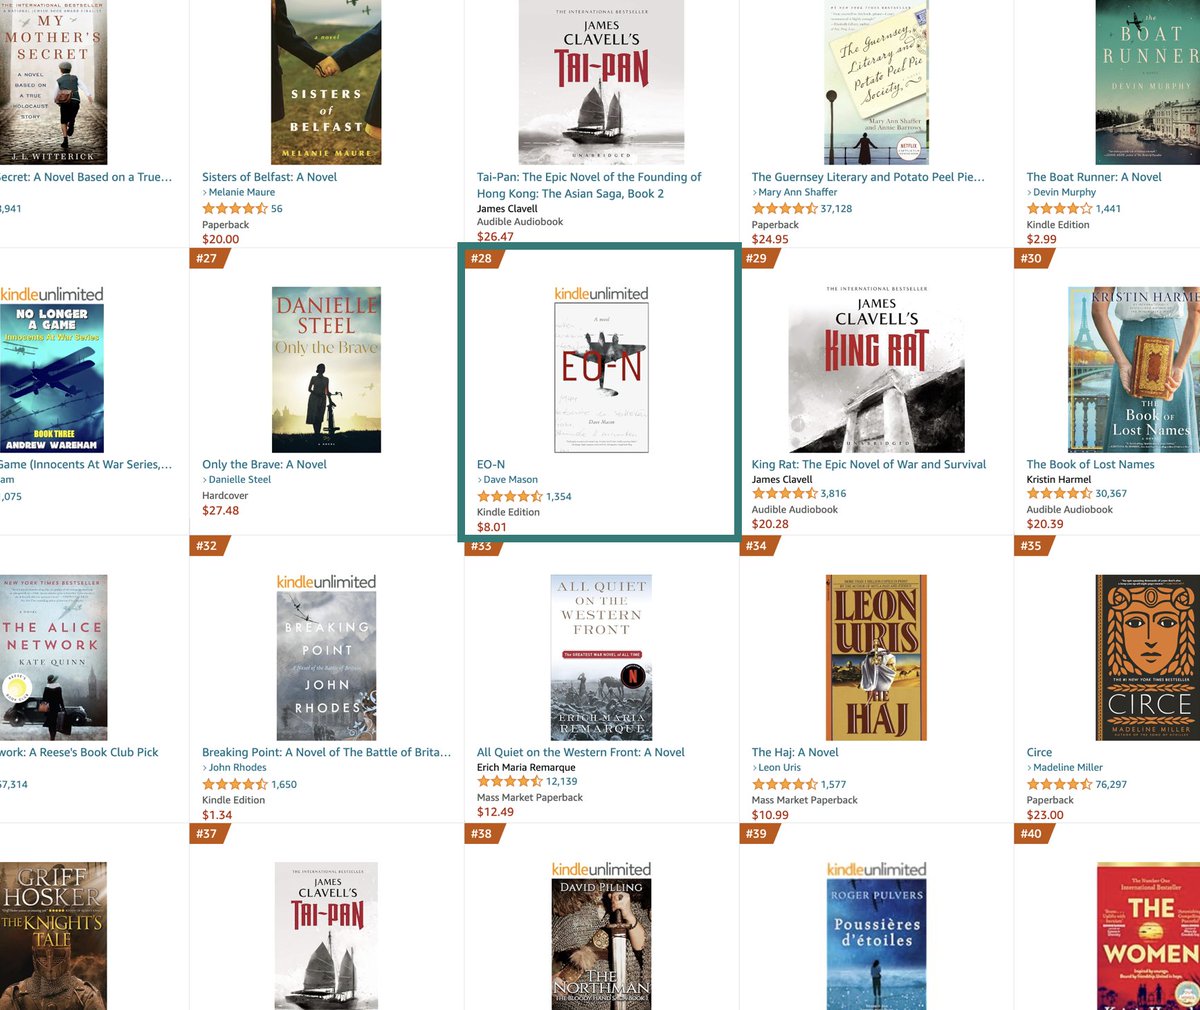 James Clavell
Kristin Harmel
Leon Uris
Danielle Steel
Erich Maria Remarque
Madeline Miller
Kristin Hannah
Griff Hosker
Kate Quinn

Incredible to be even momentarily on the same page as these authors. 
#historicalfiction #amazonbestsellers